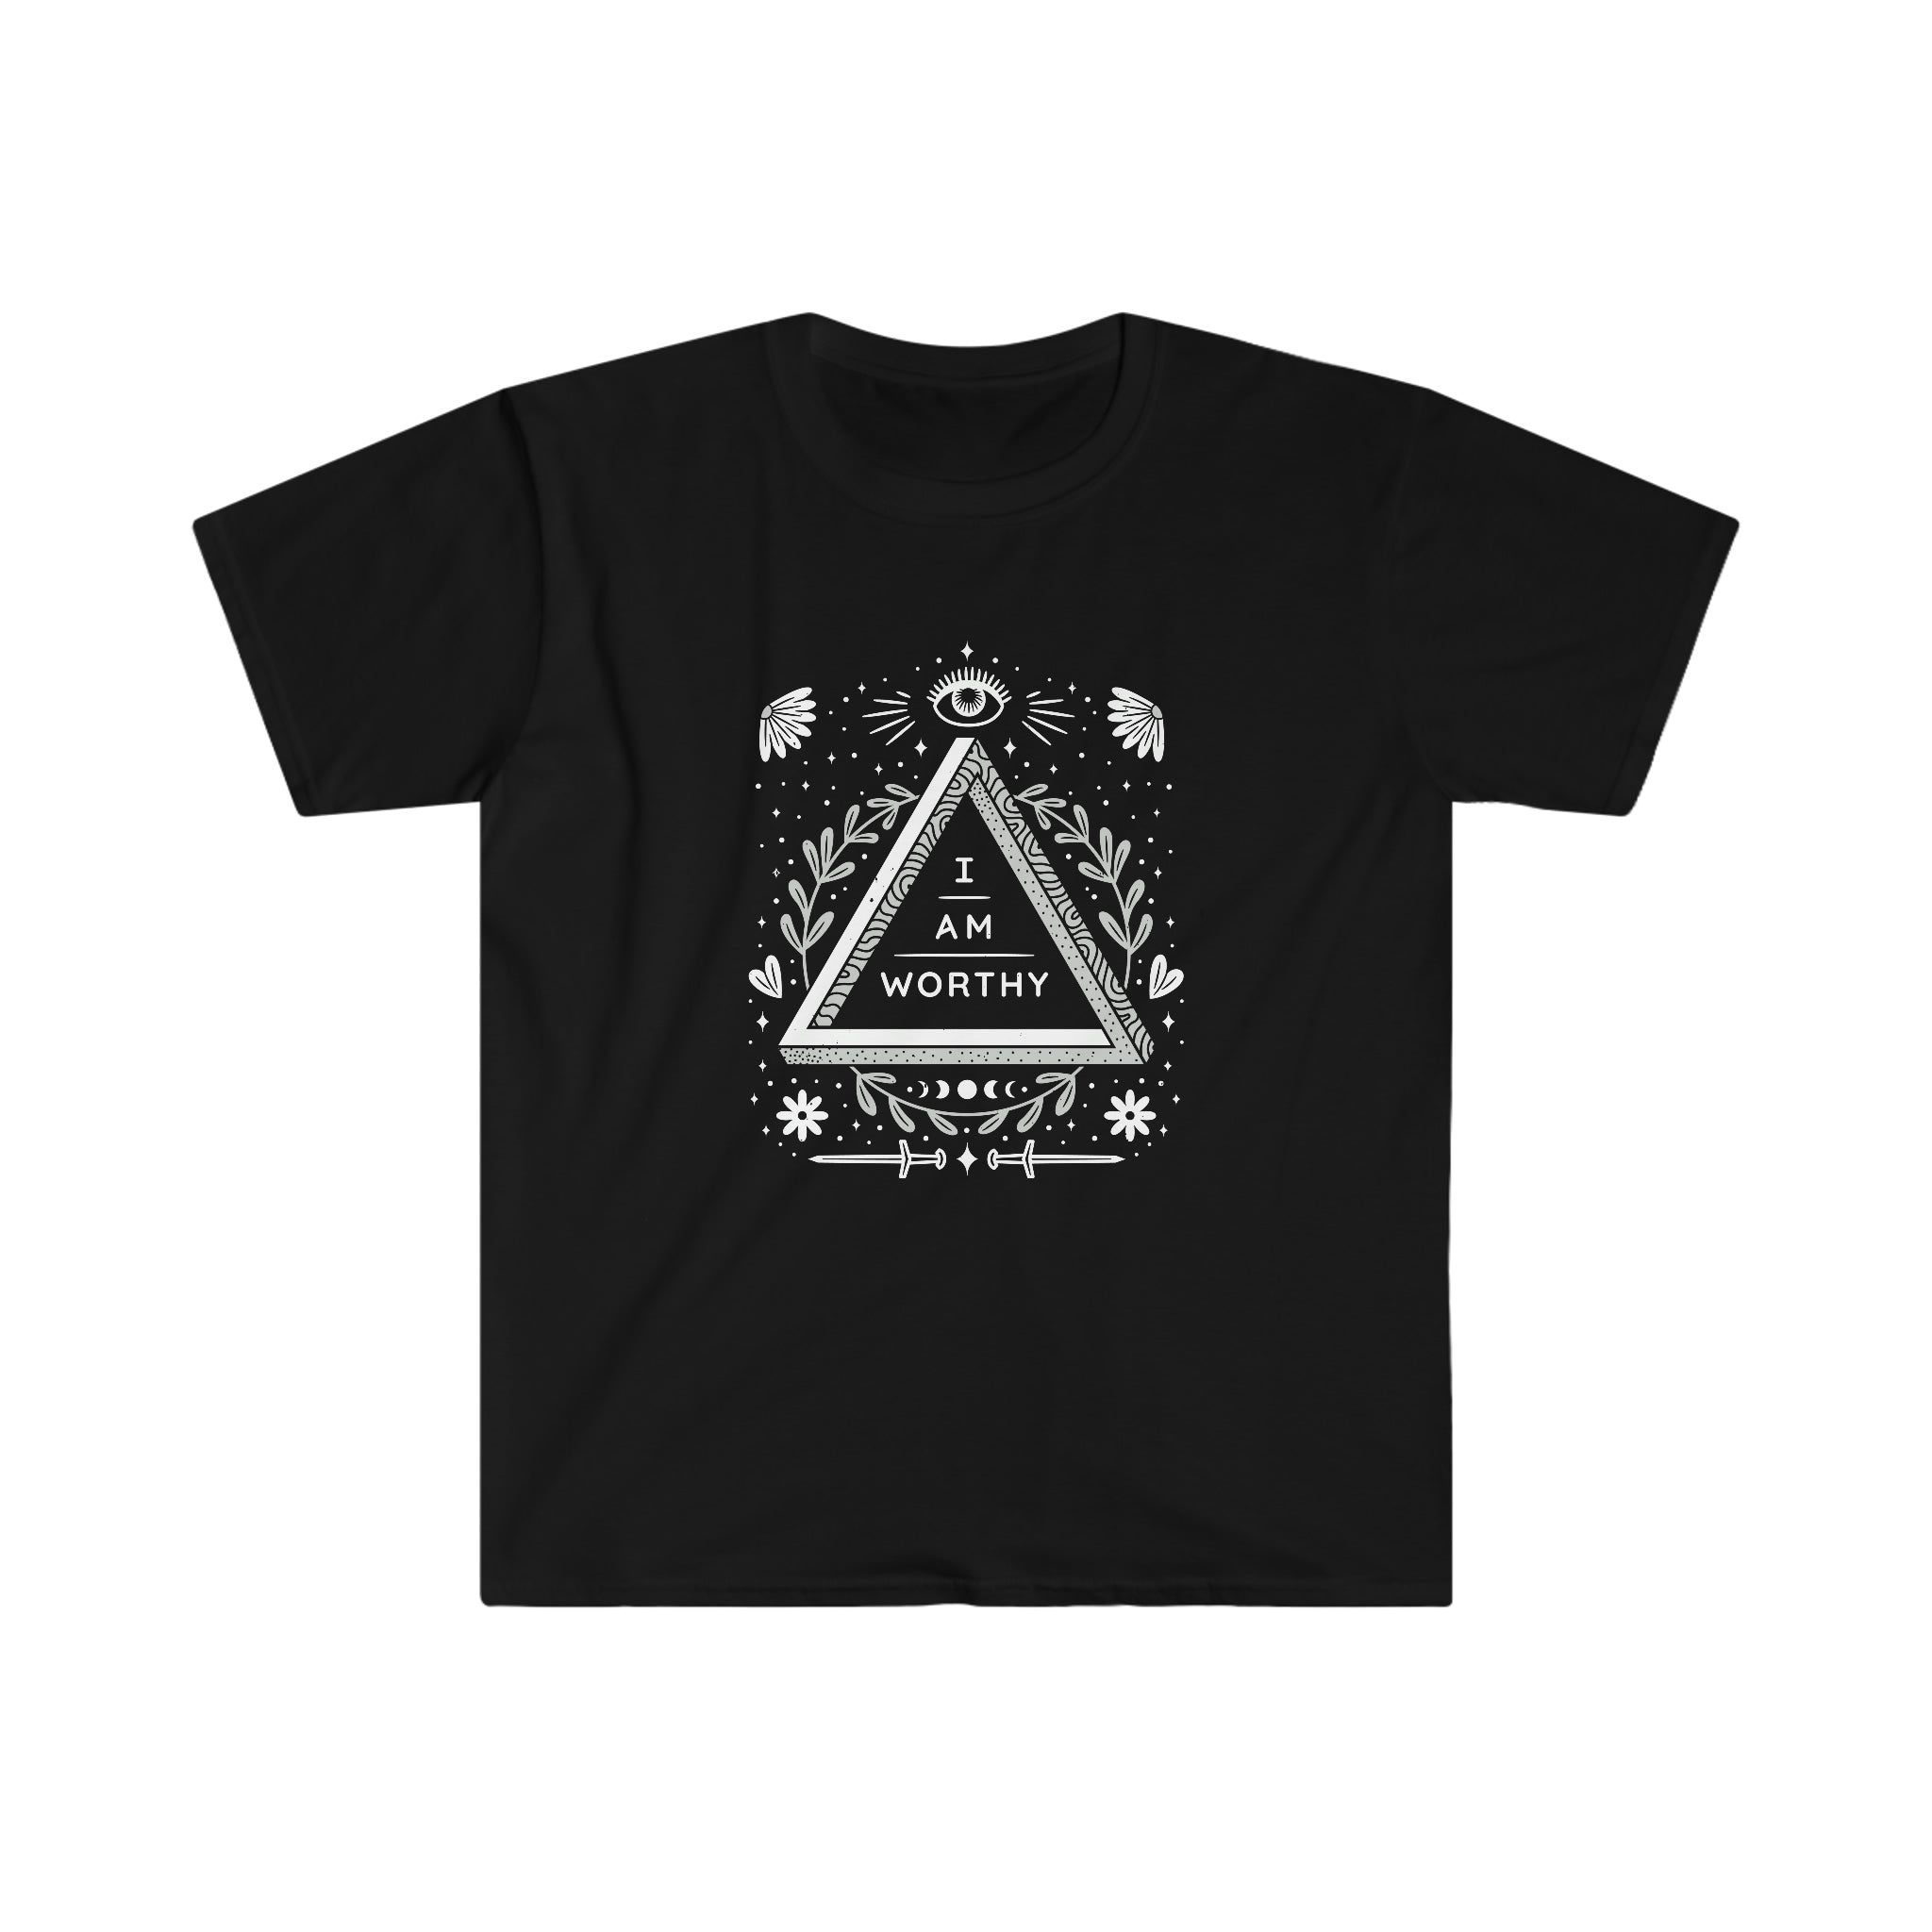 A confident I Am Worthy T-Shirt featuring an image of a triangle and a flower.